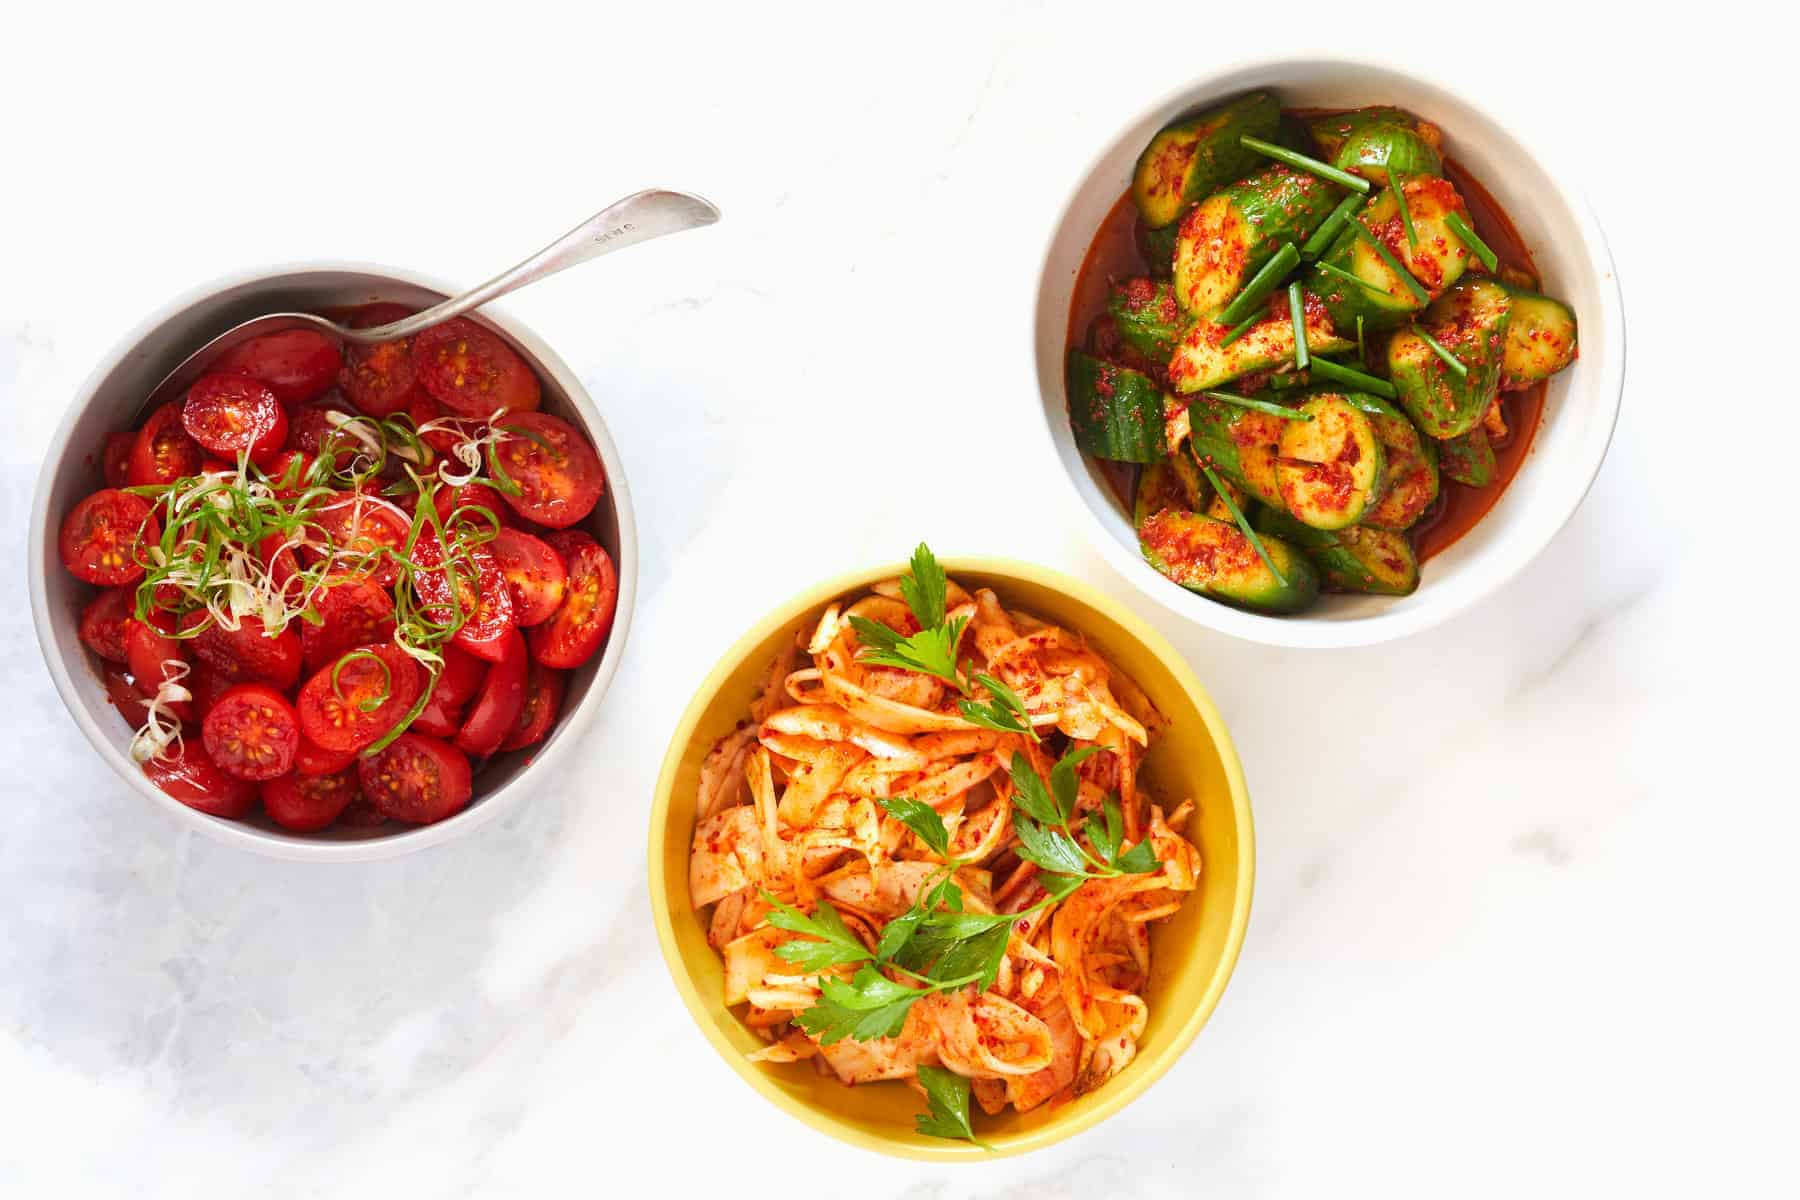 Recipe for Quick Kimchi Cucumbers, Fennel and Cherry Tomatoes